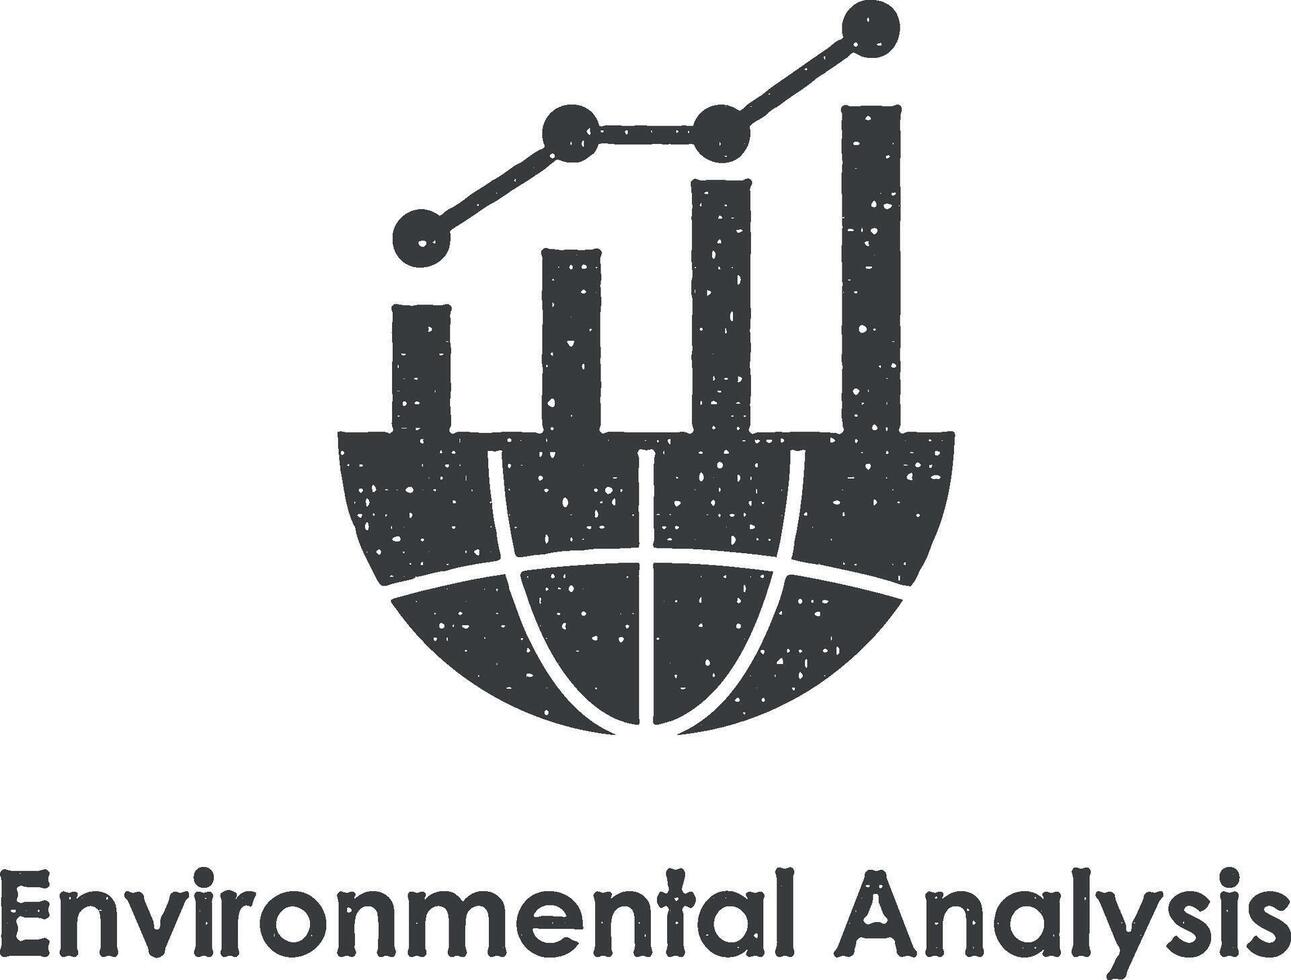 global, chart, environmental analysis vector icon illustration with stamp effect